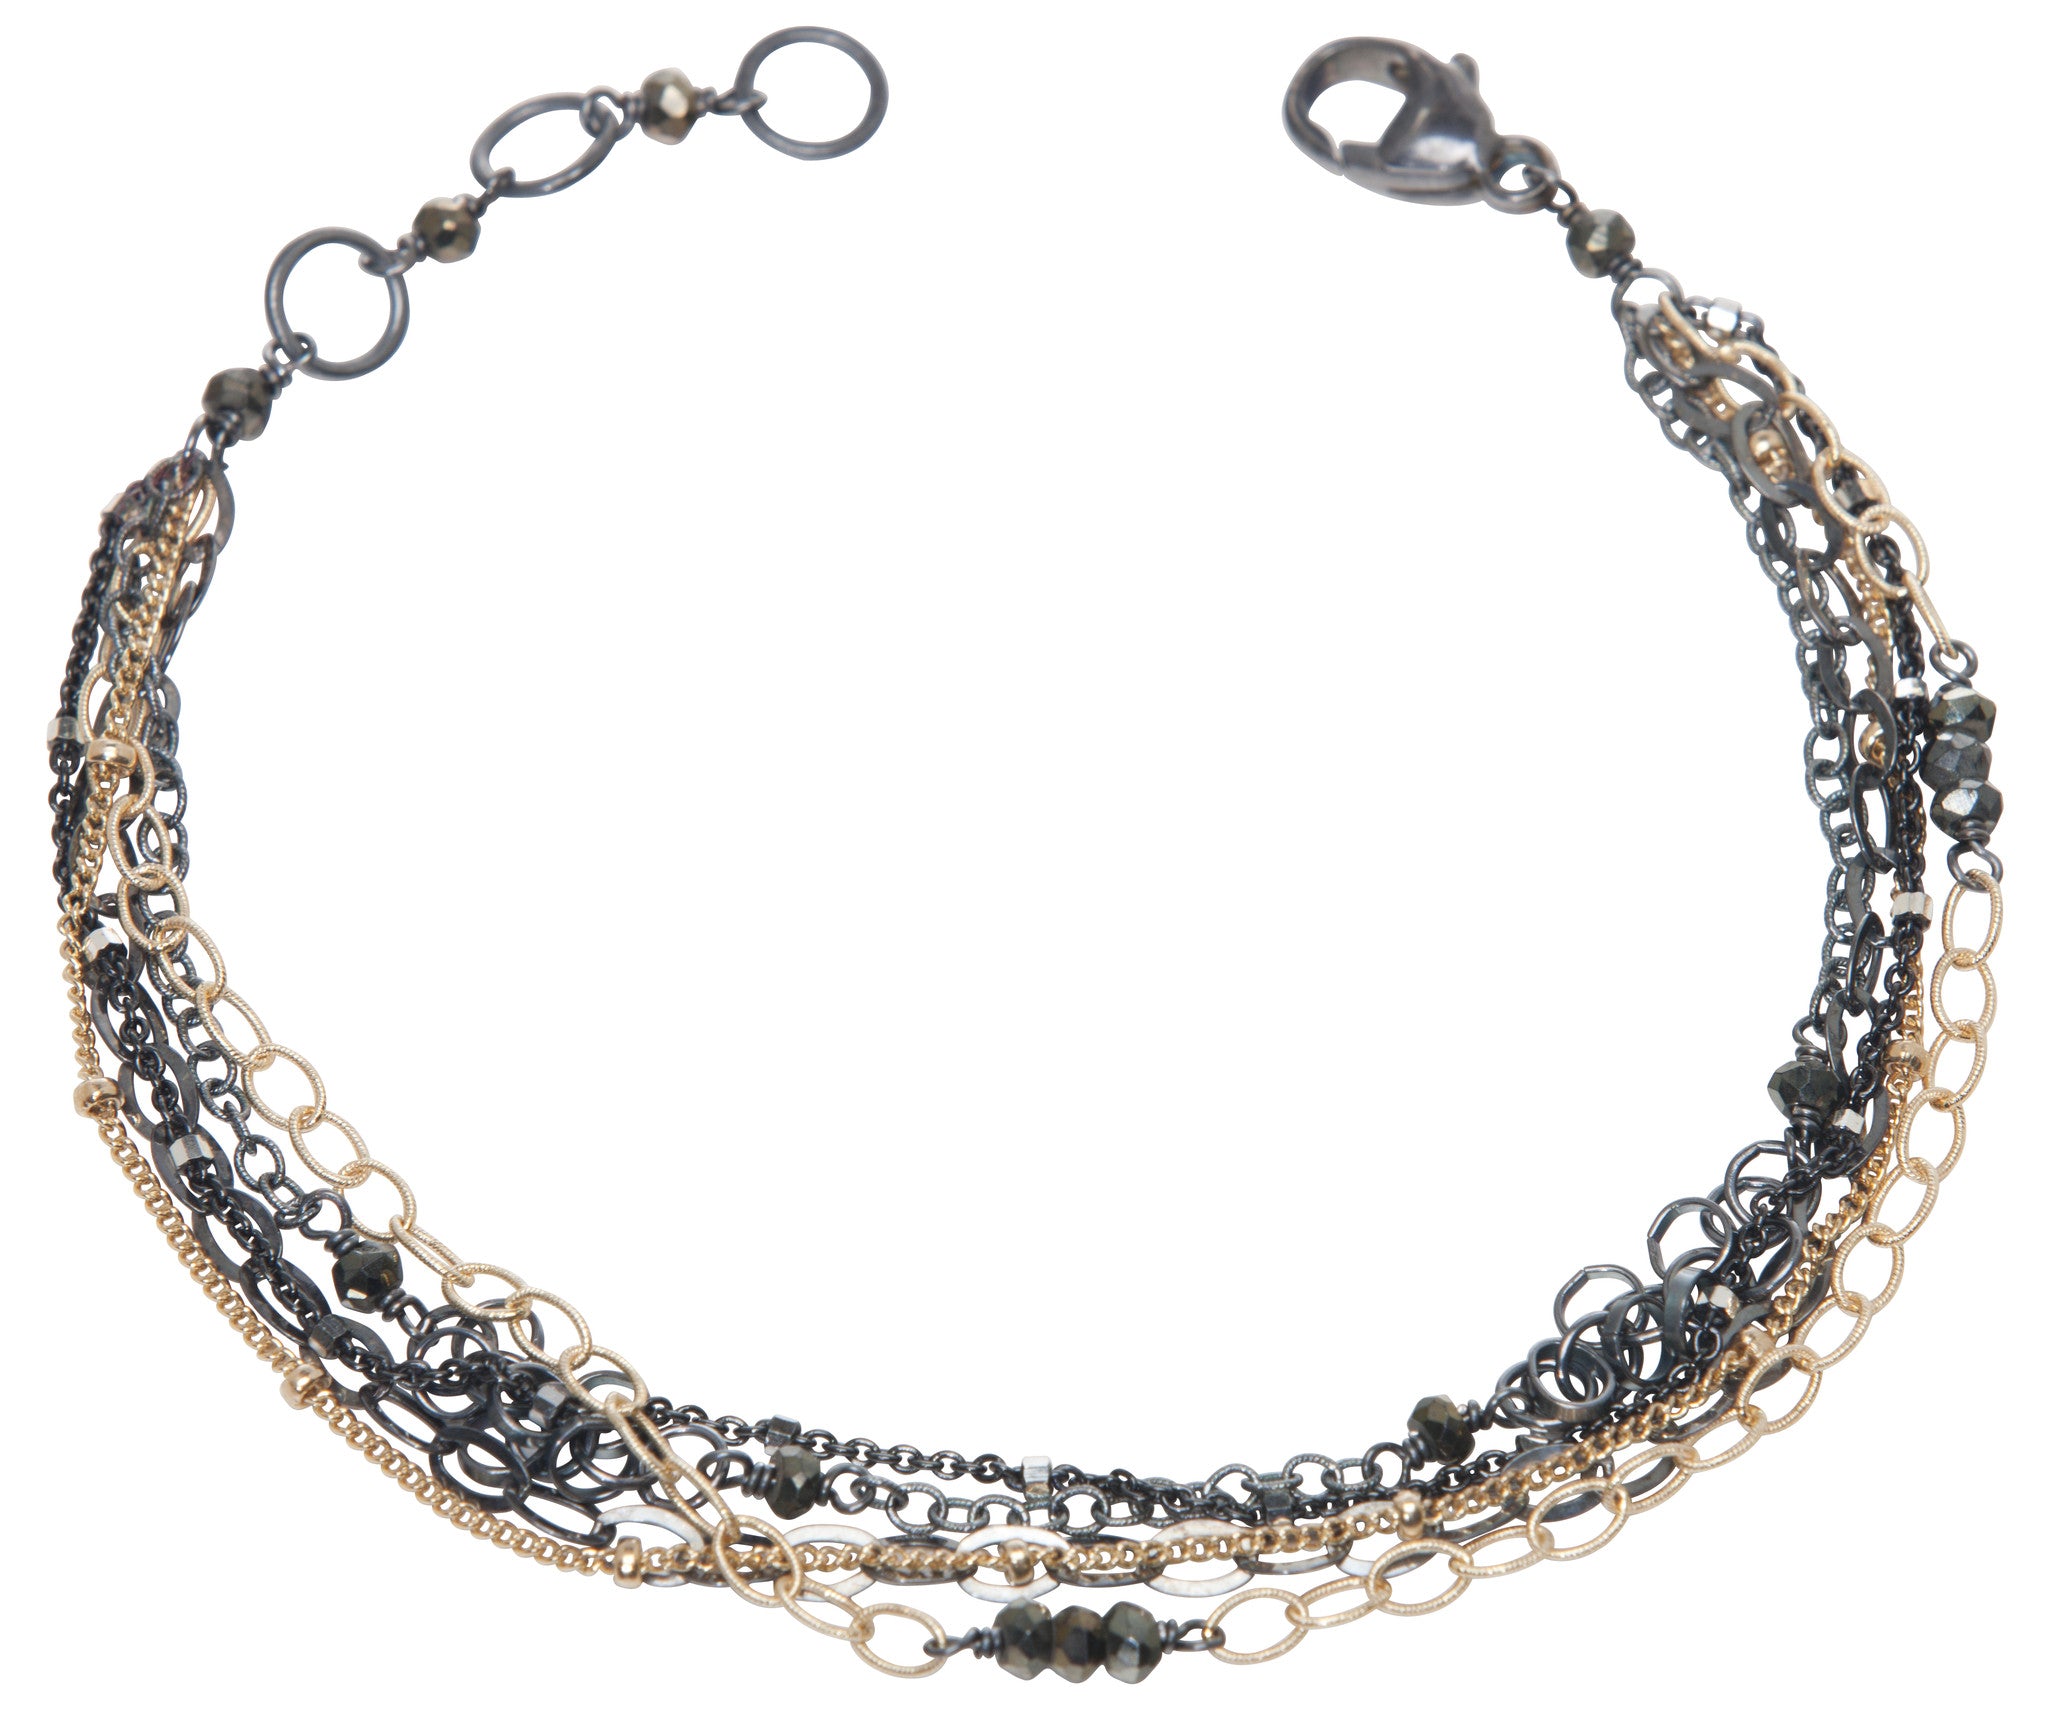 layering chain bracelet - oxidized silver and gold filled